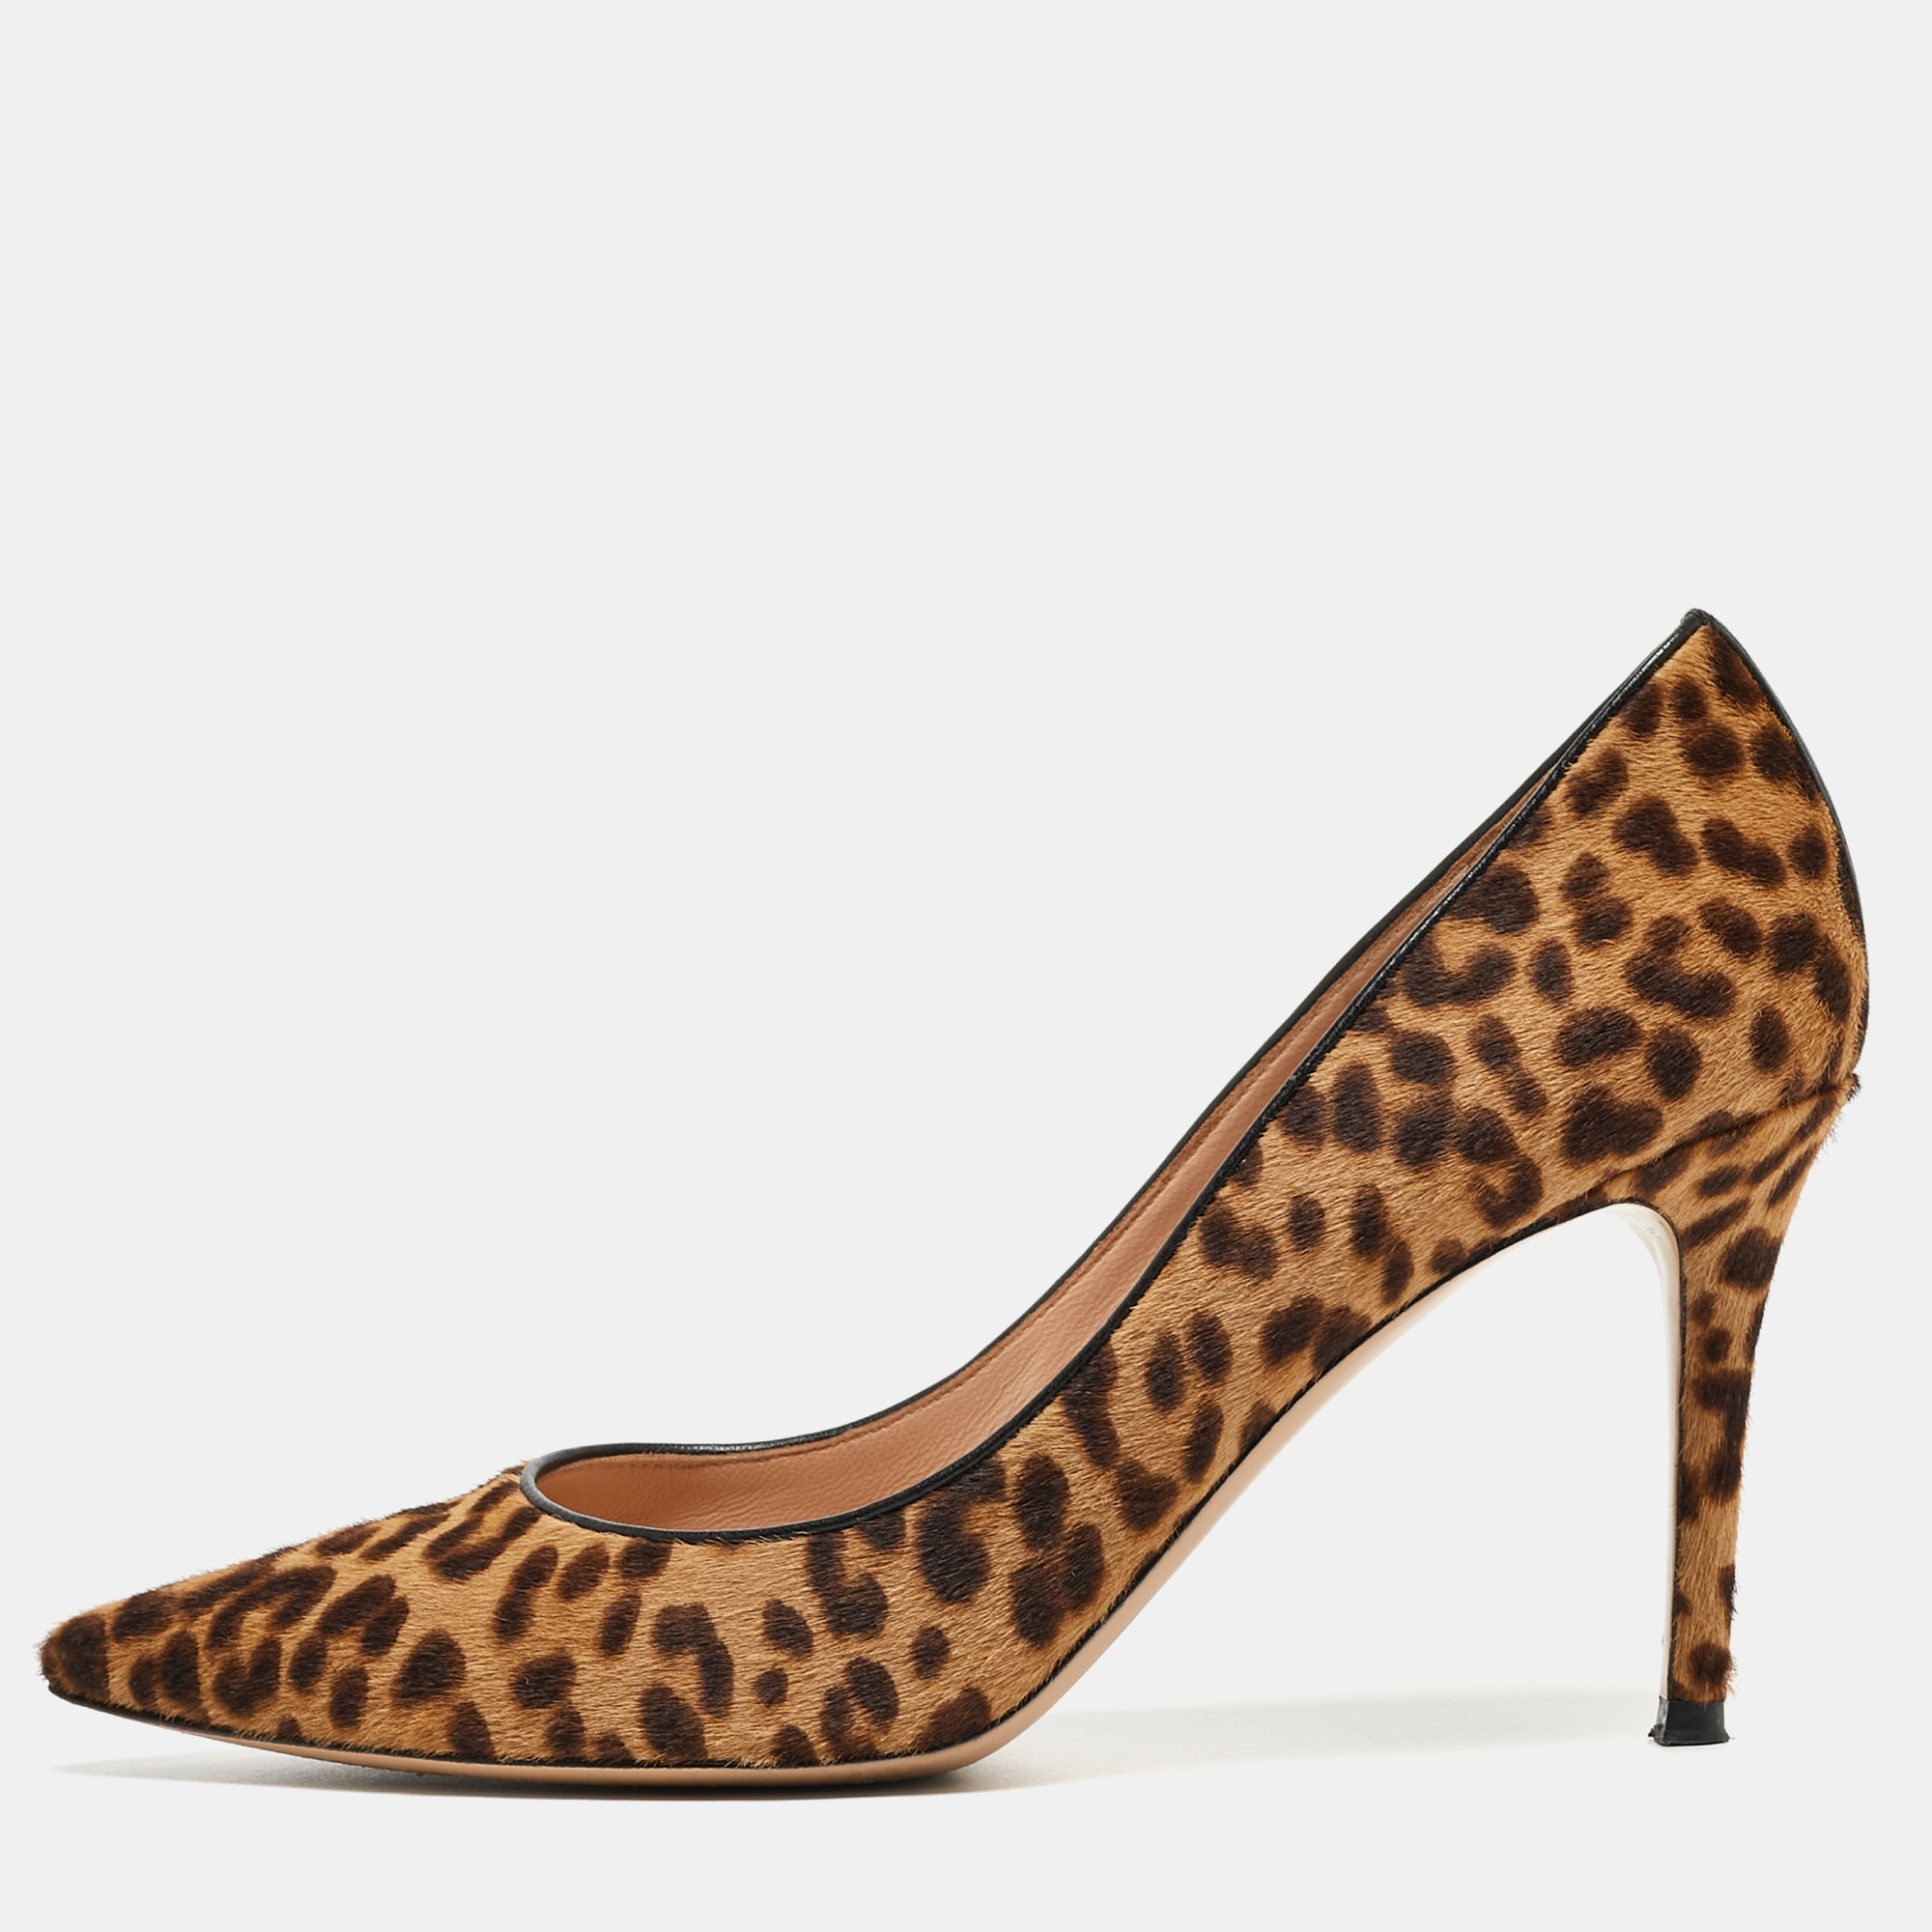 Gianvito Rossi Brown/Beige Leopard Print Calf Hair Pointed Toe Pumps Size 40